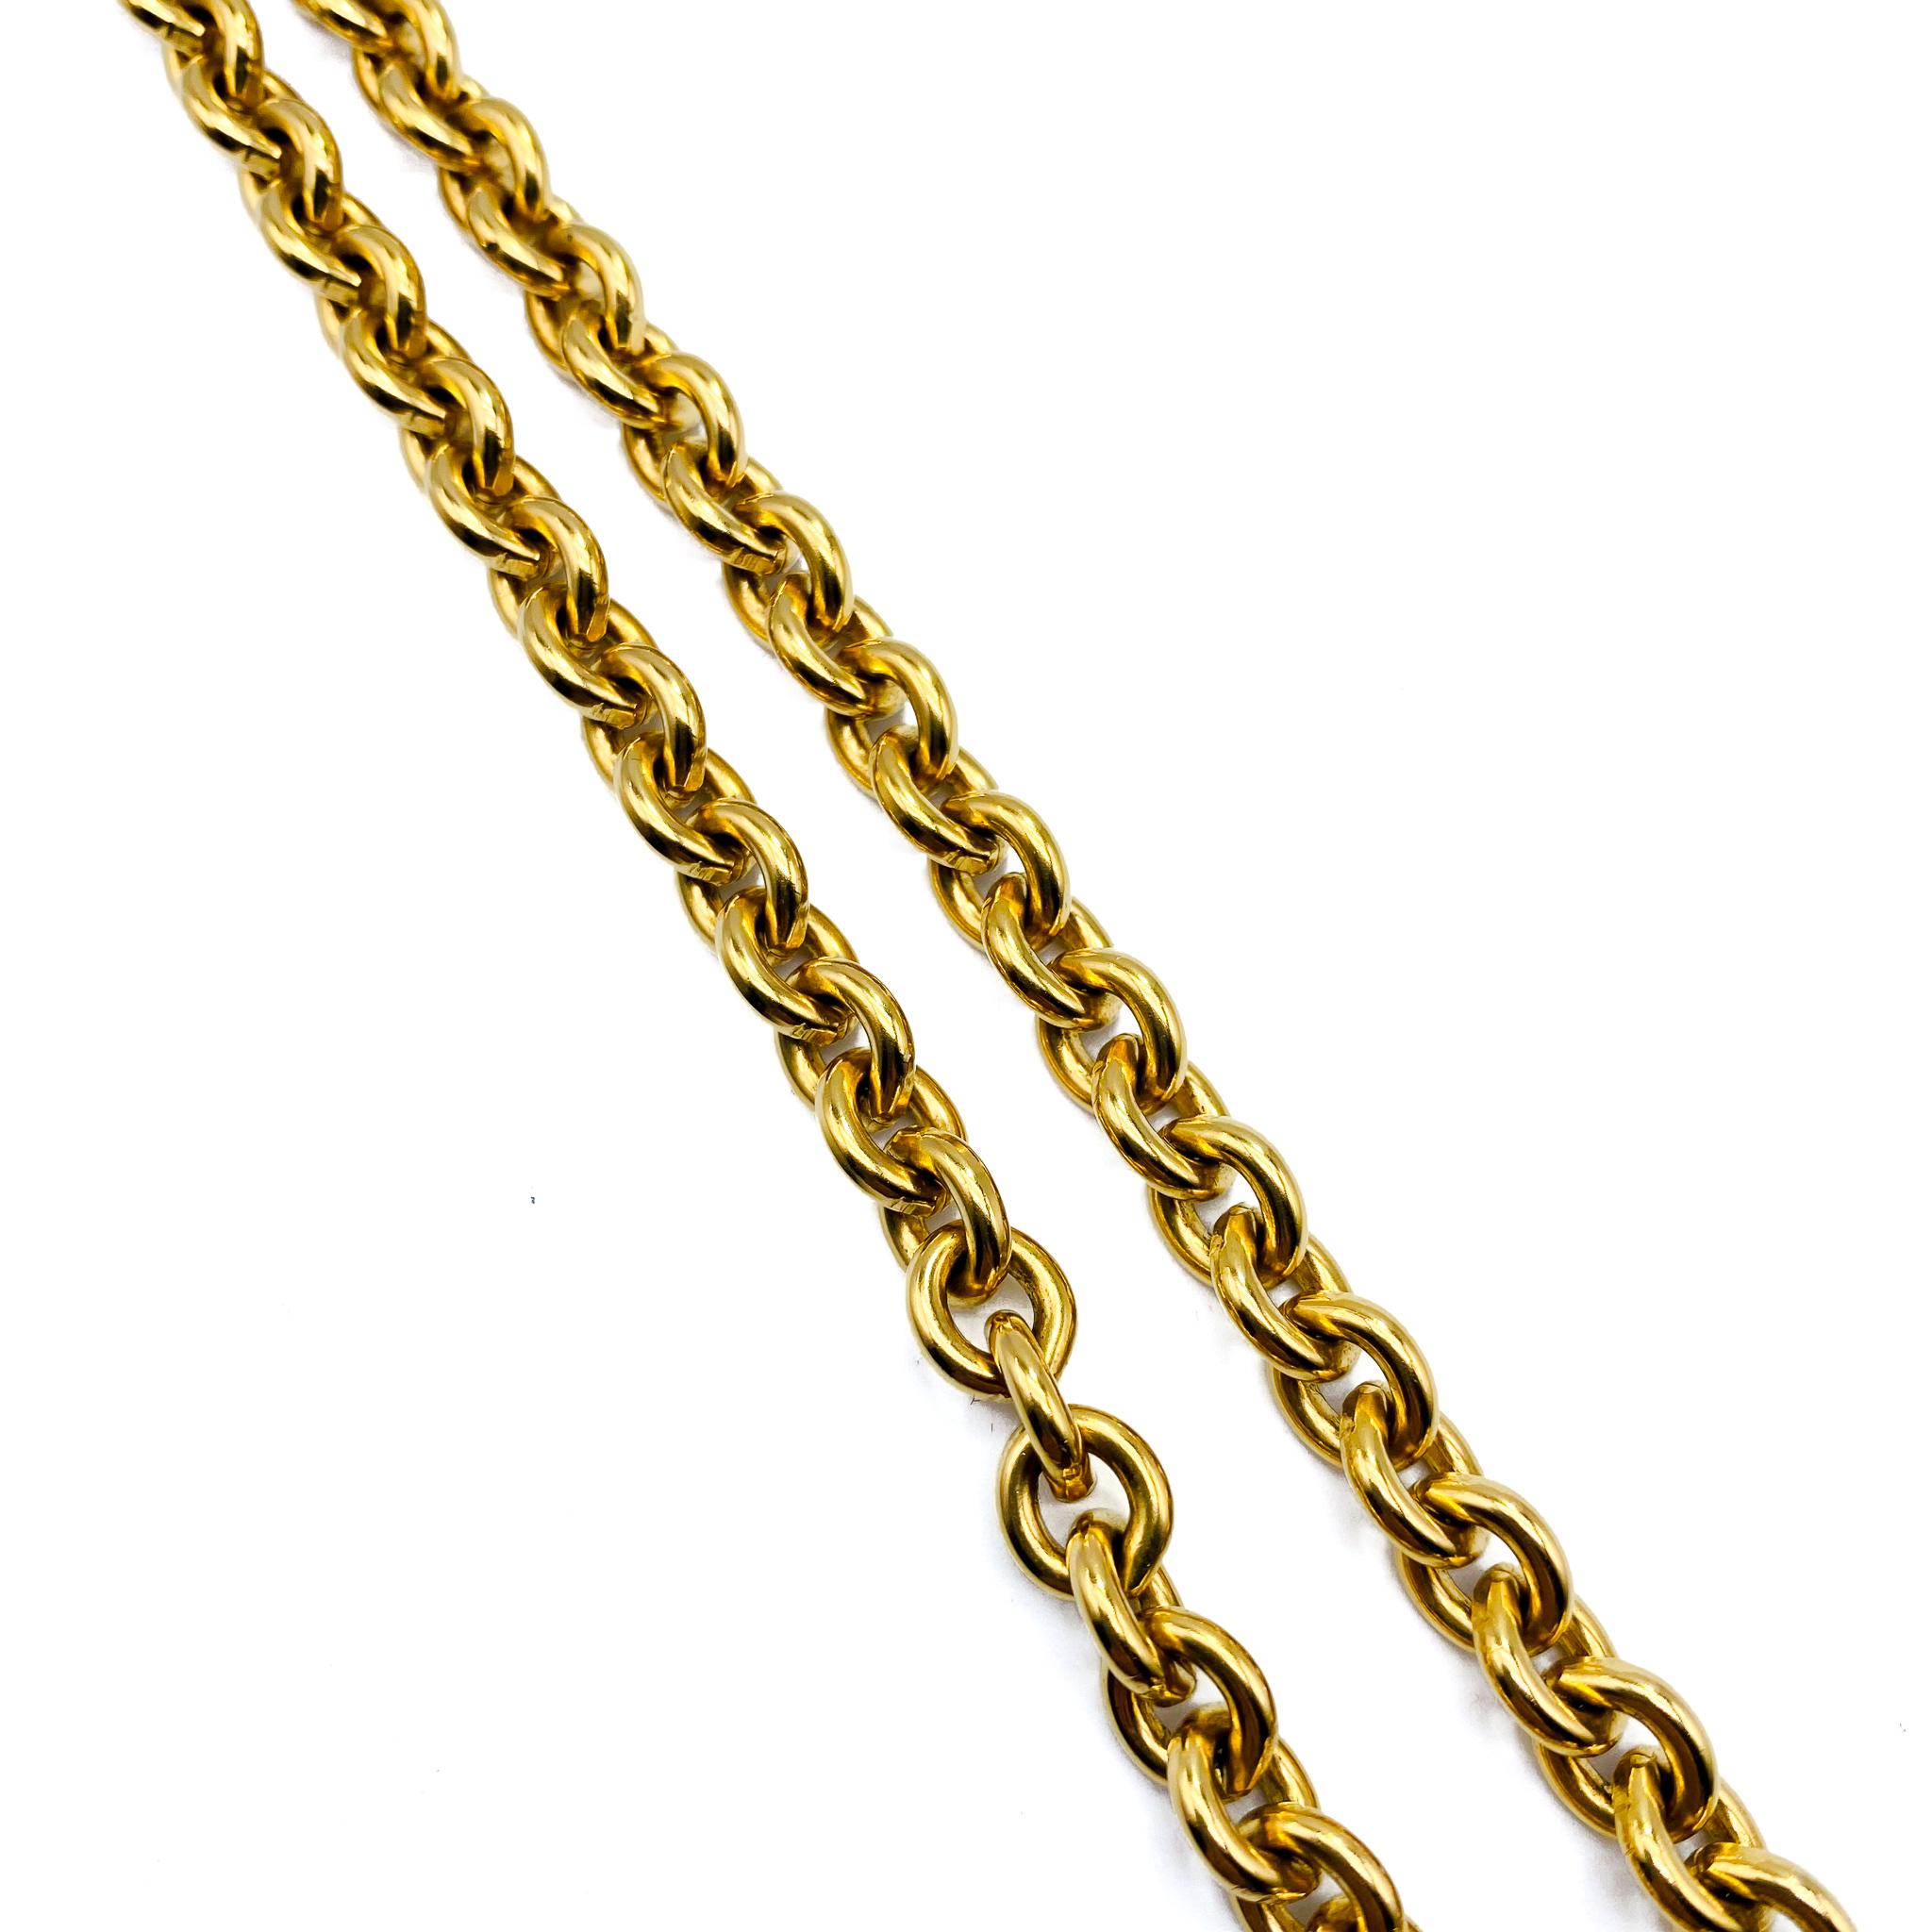 Vintage Chanel Necklace 1990s - 1994 AW Collection 3